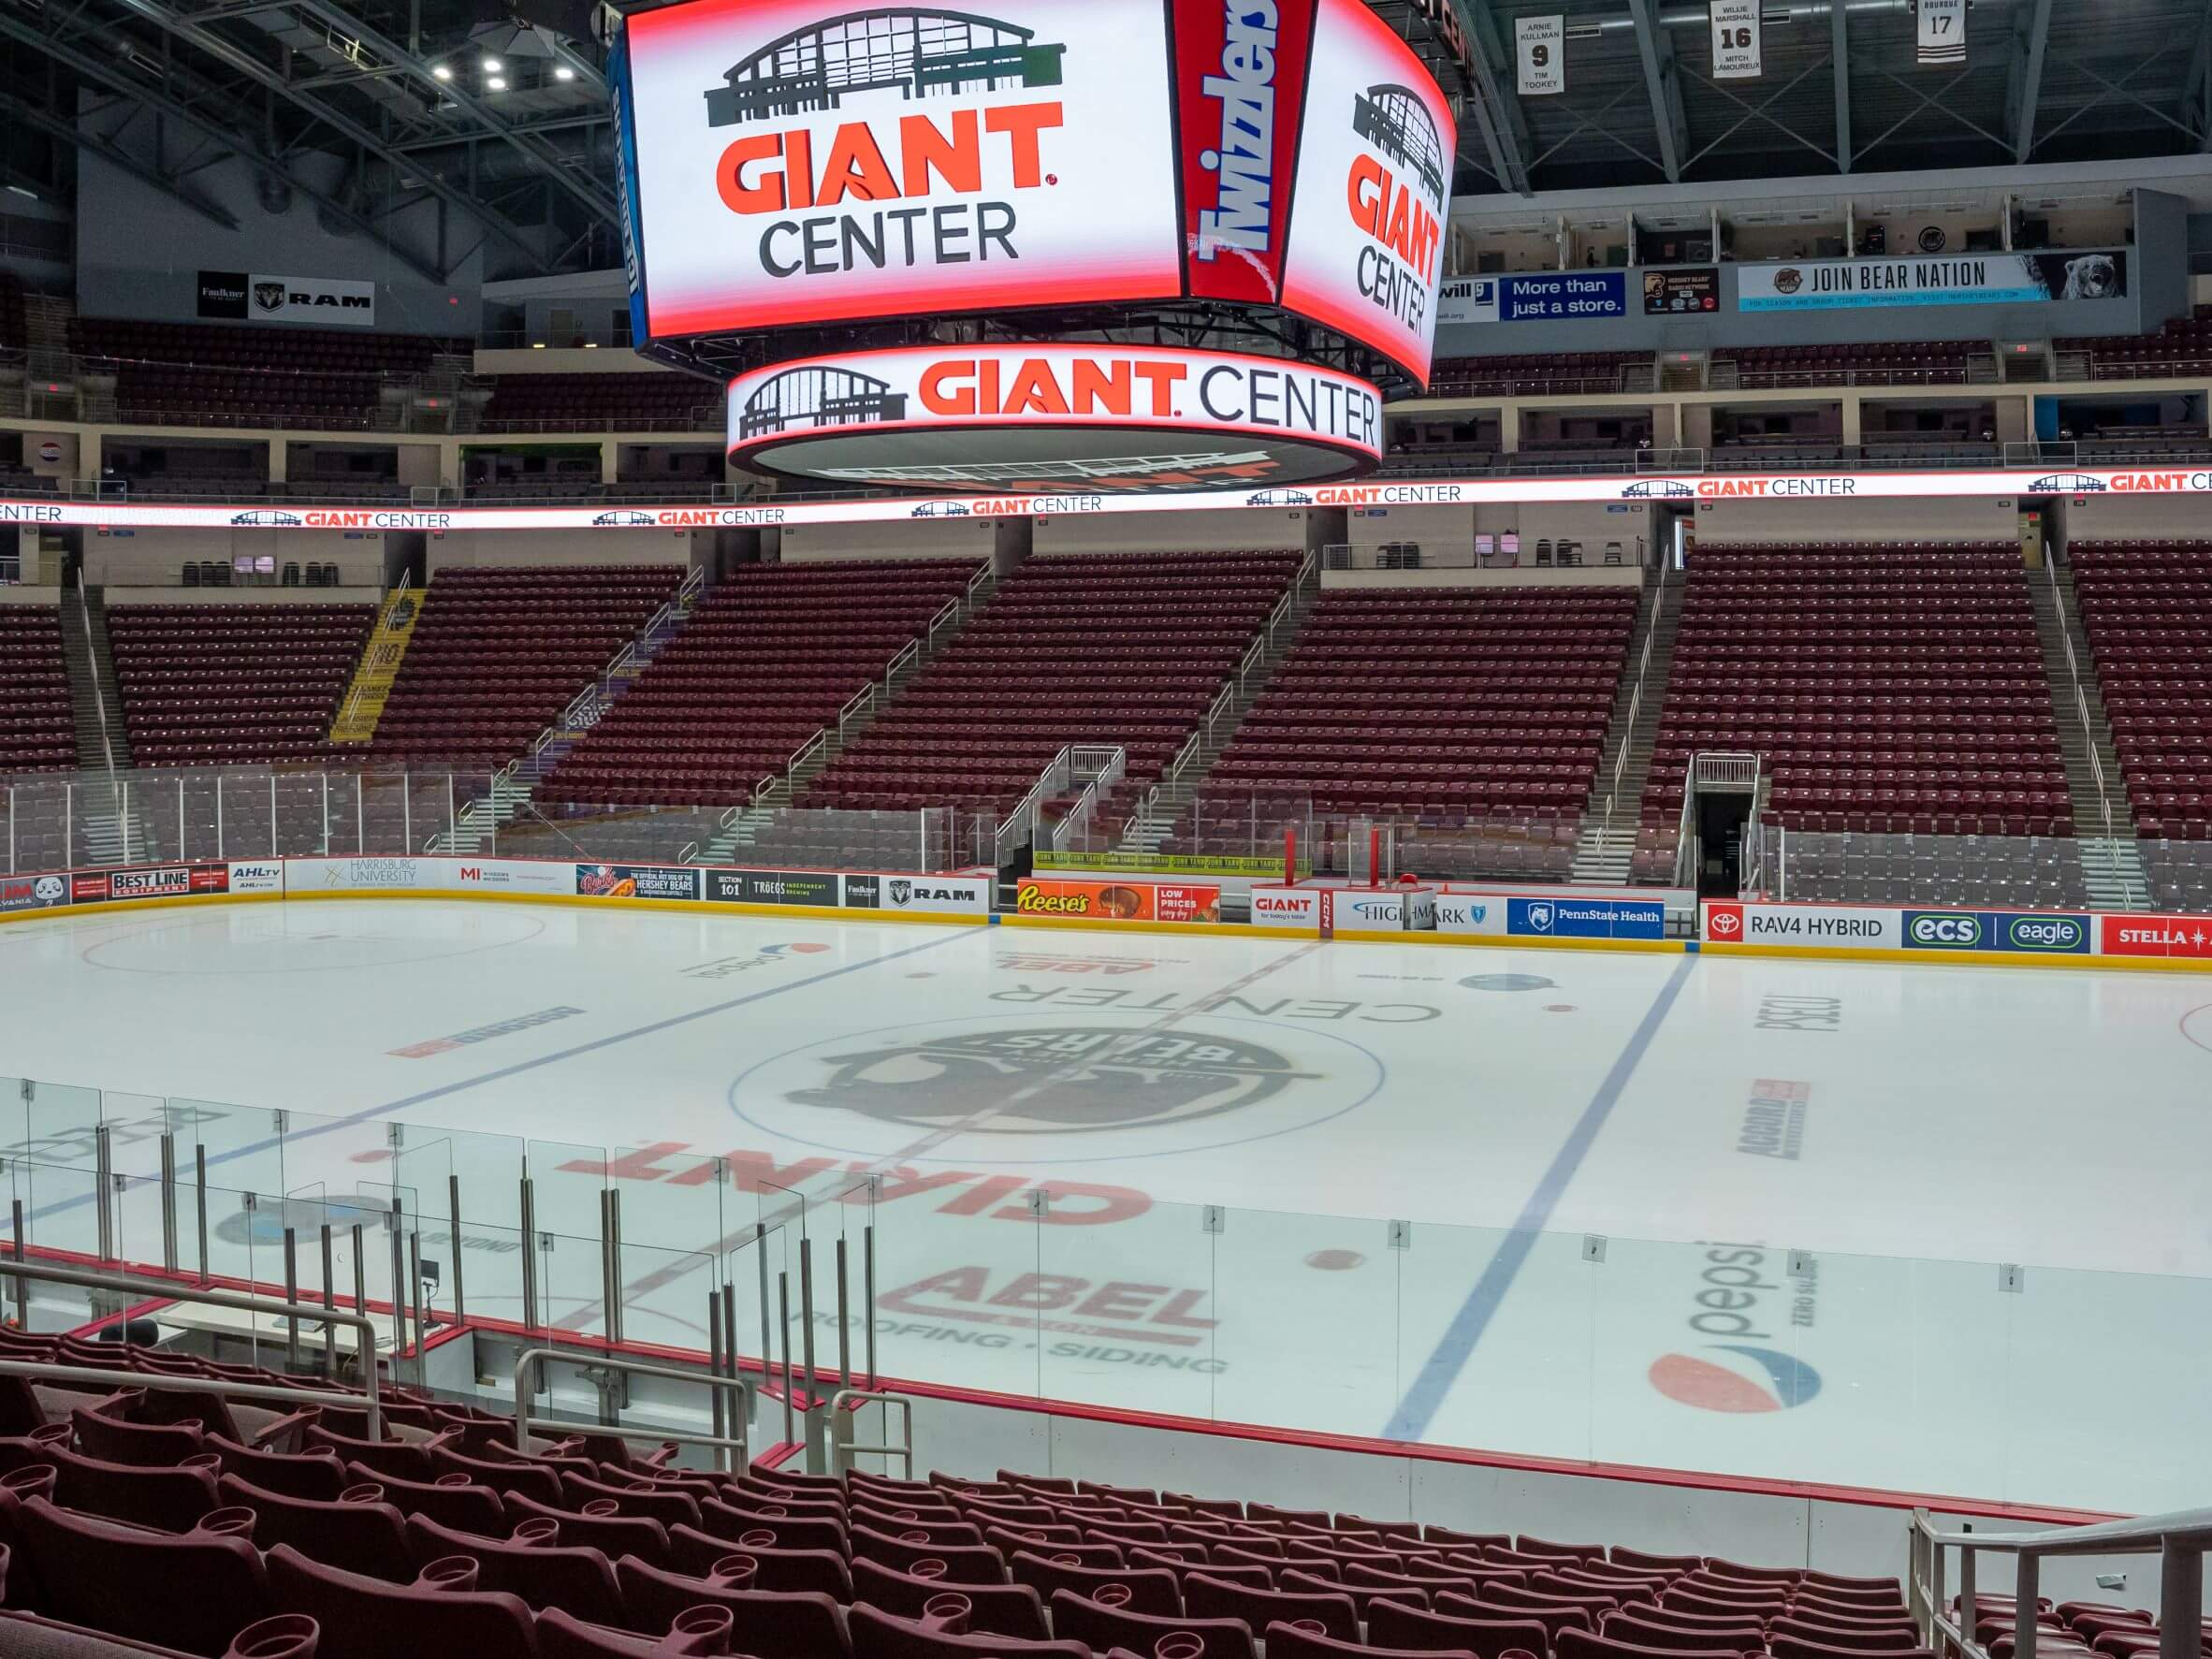 Seating Chart | Giant Center